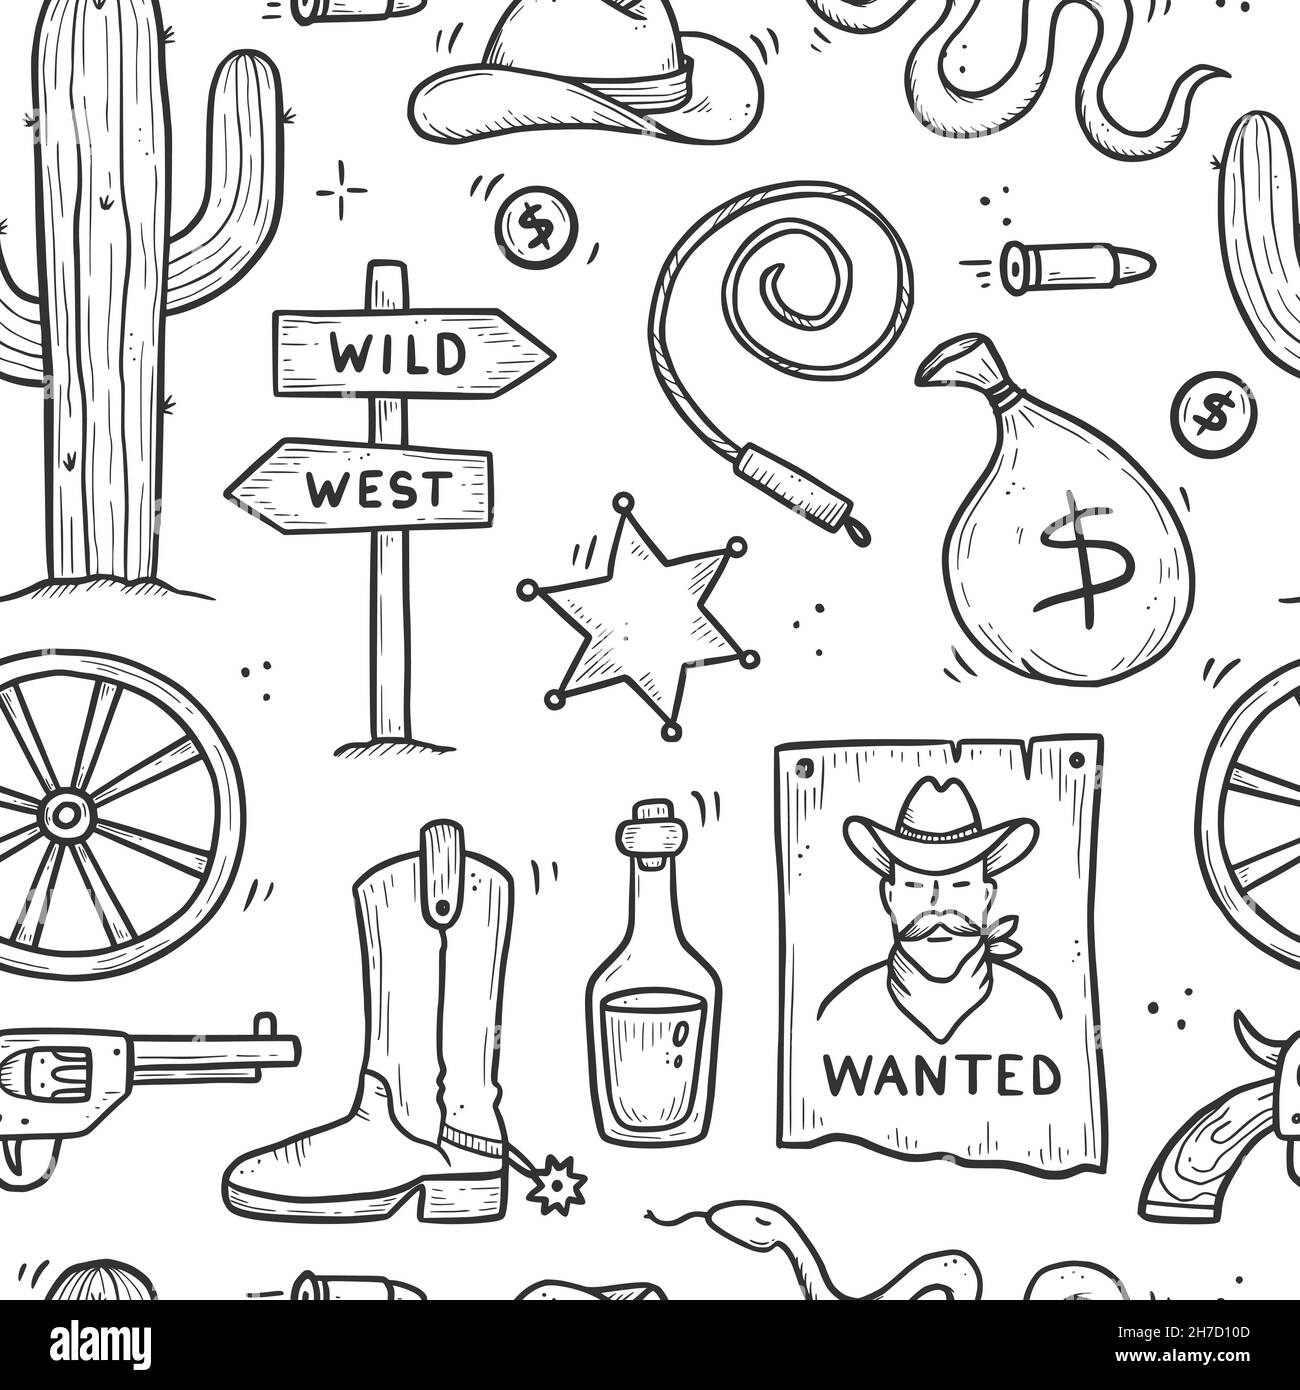 Cowboy western doodle seamless pattern. Hand drawn sketch line style. Cowboy shoe, cow skull, gun, cactus element. Wild west vector illustration. Stock Vector